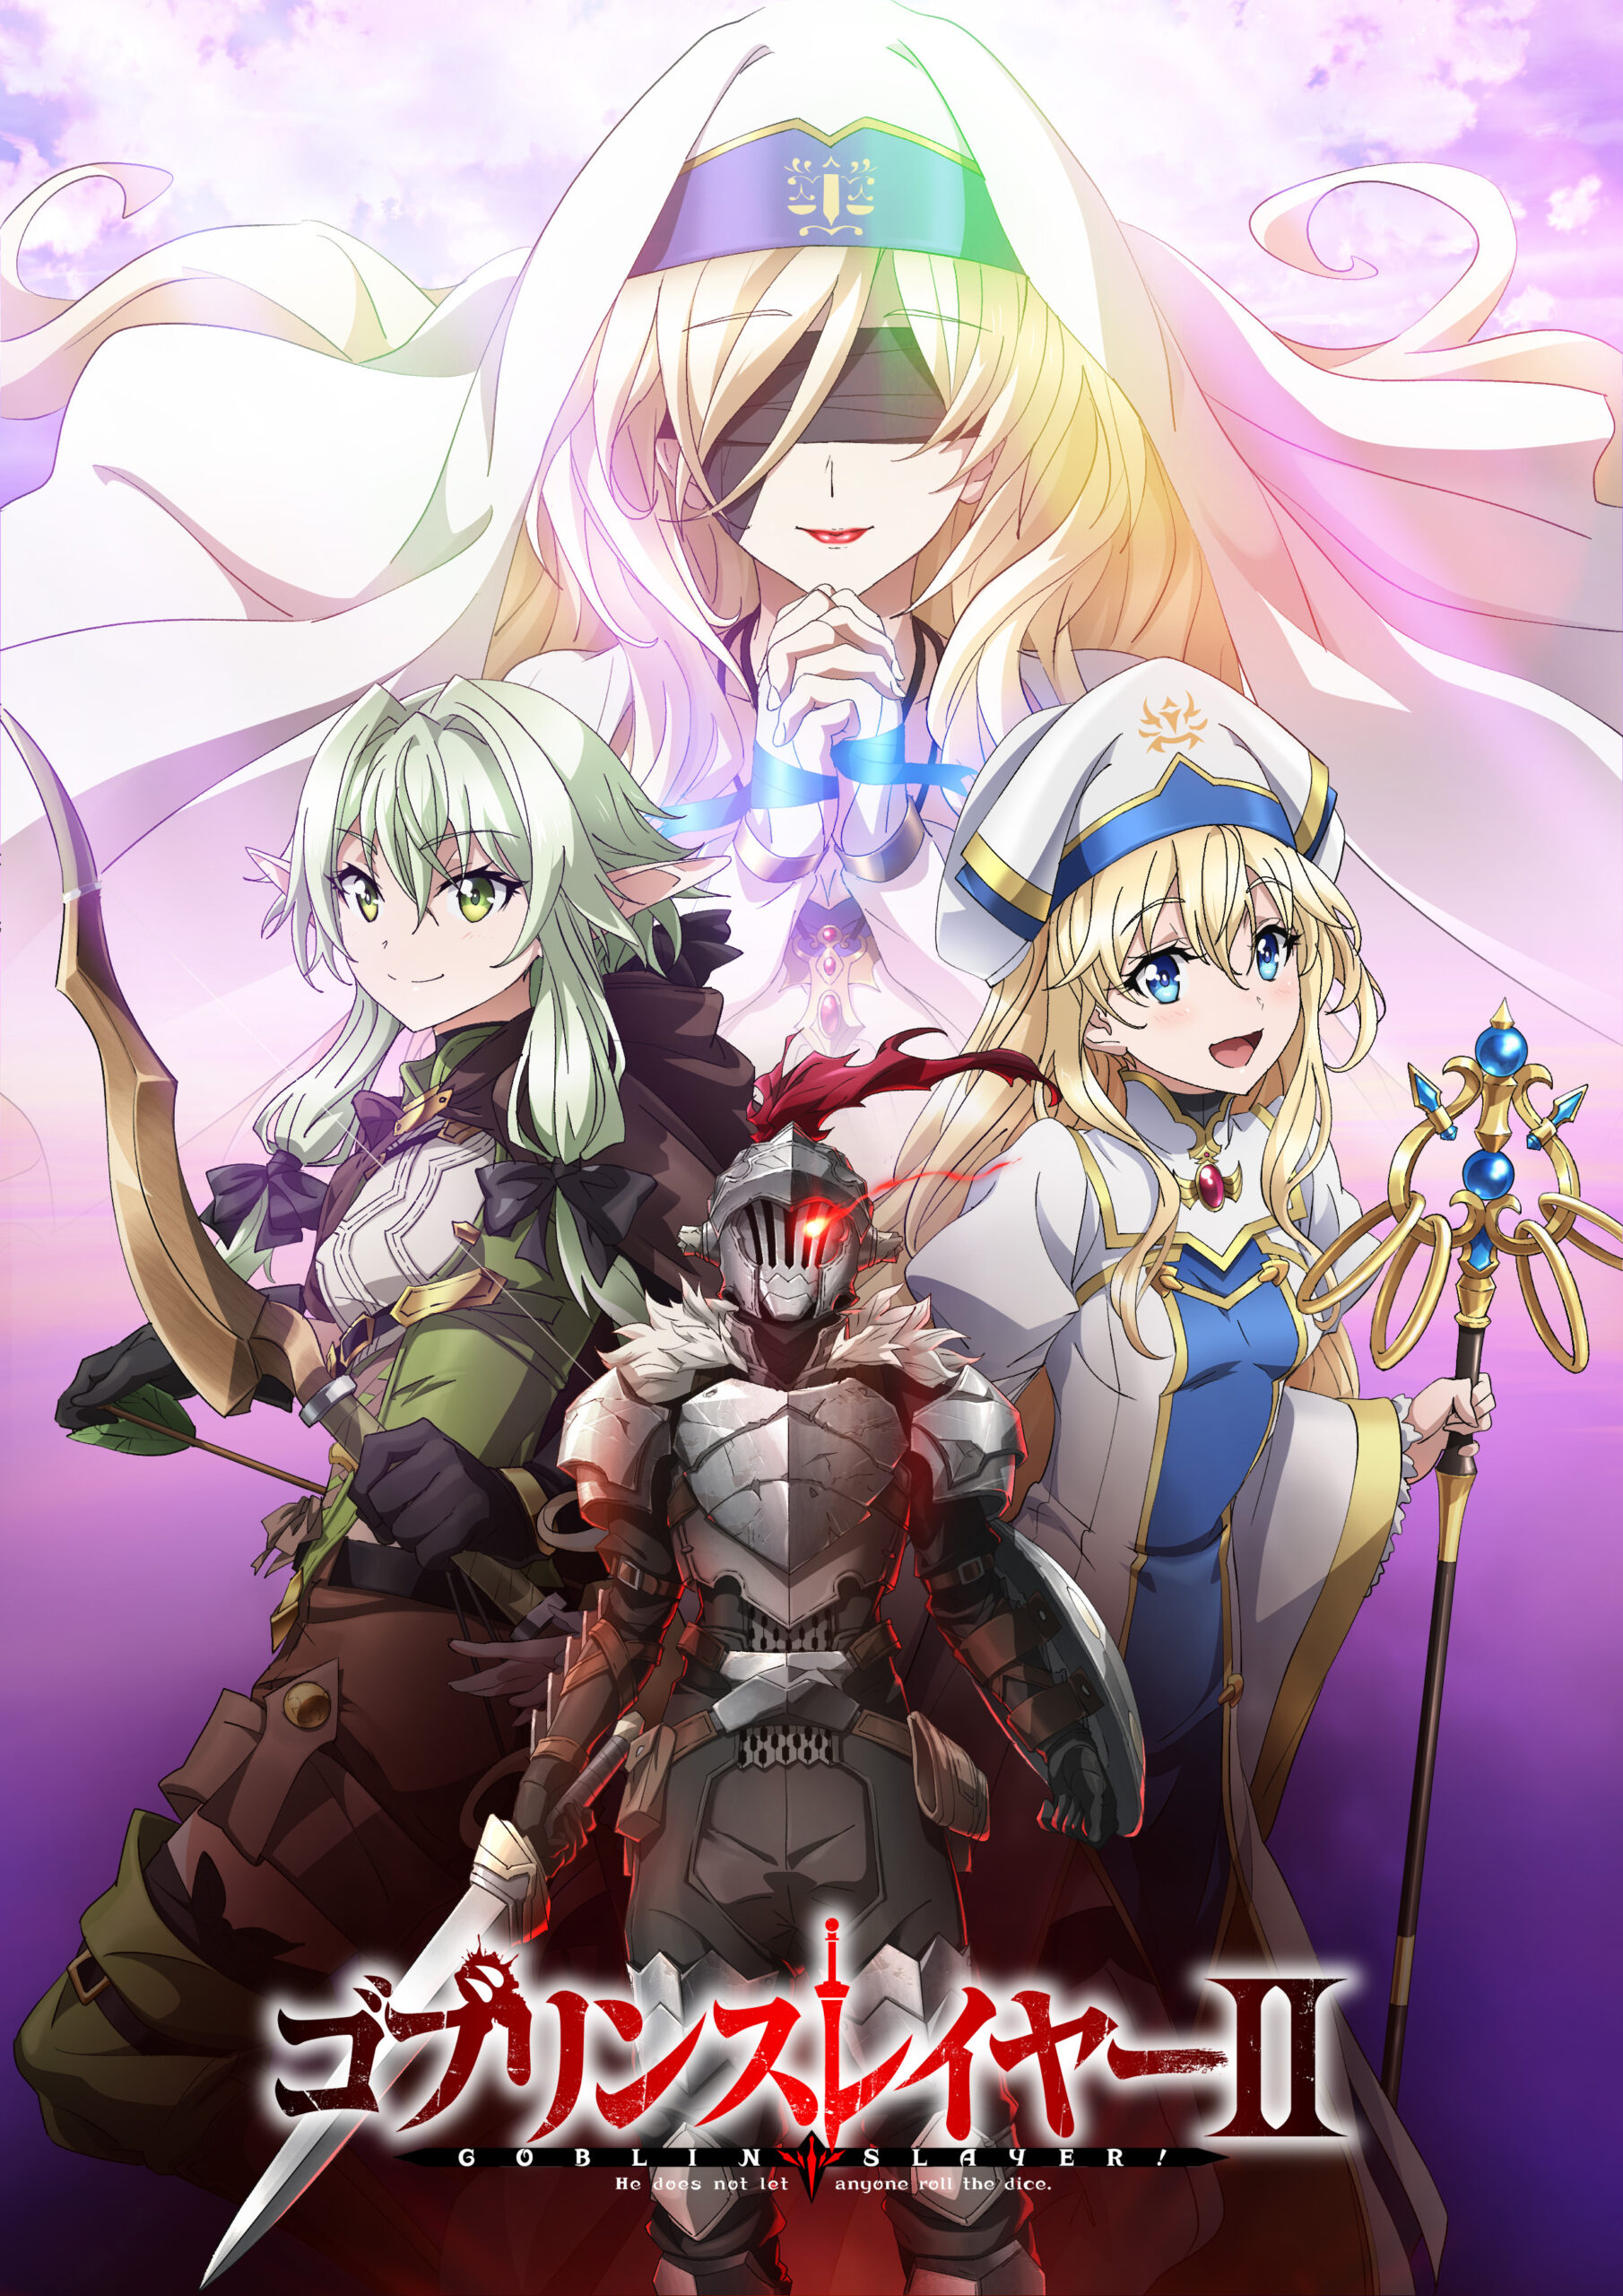 Goblin Slayer Season 2 what will it be about